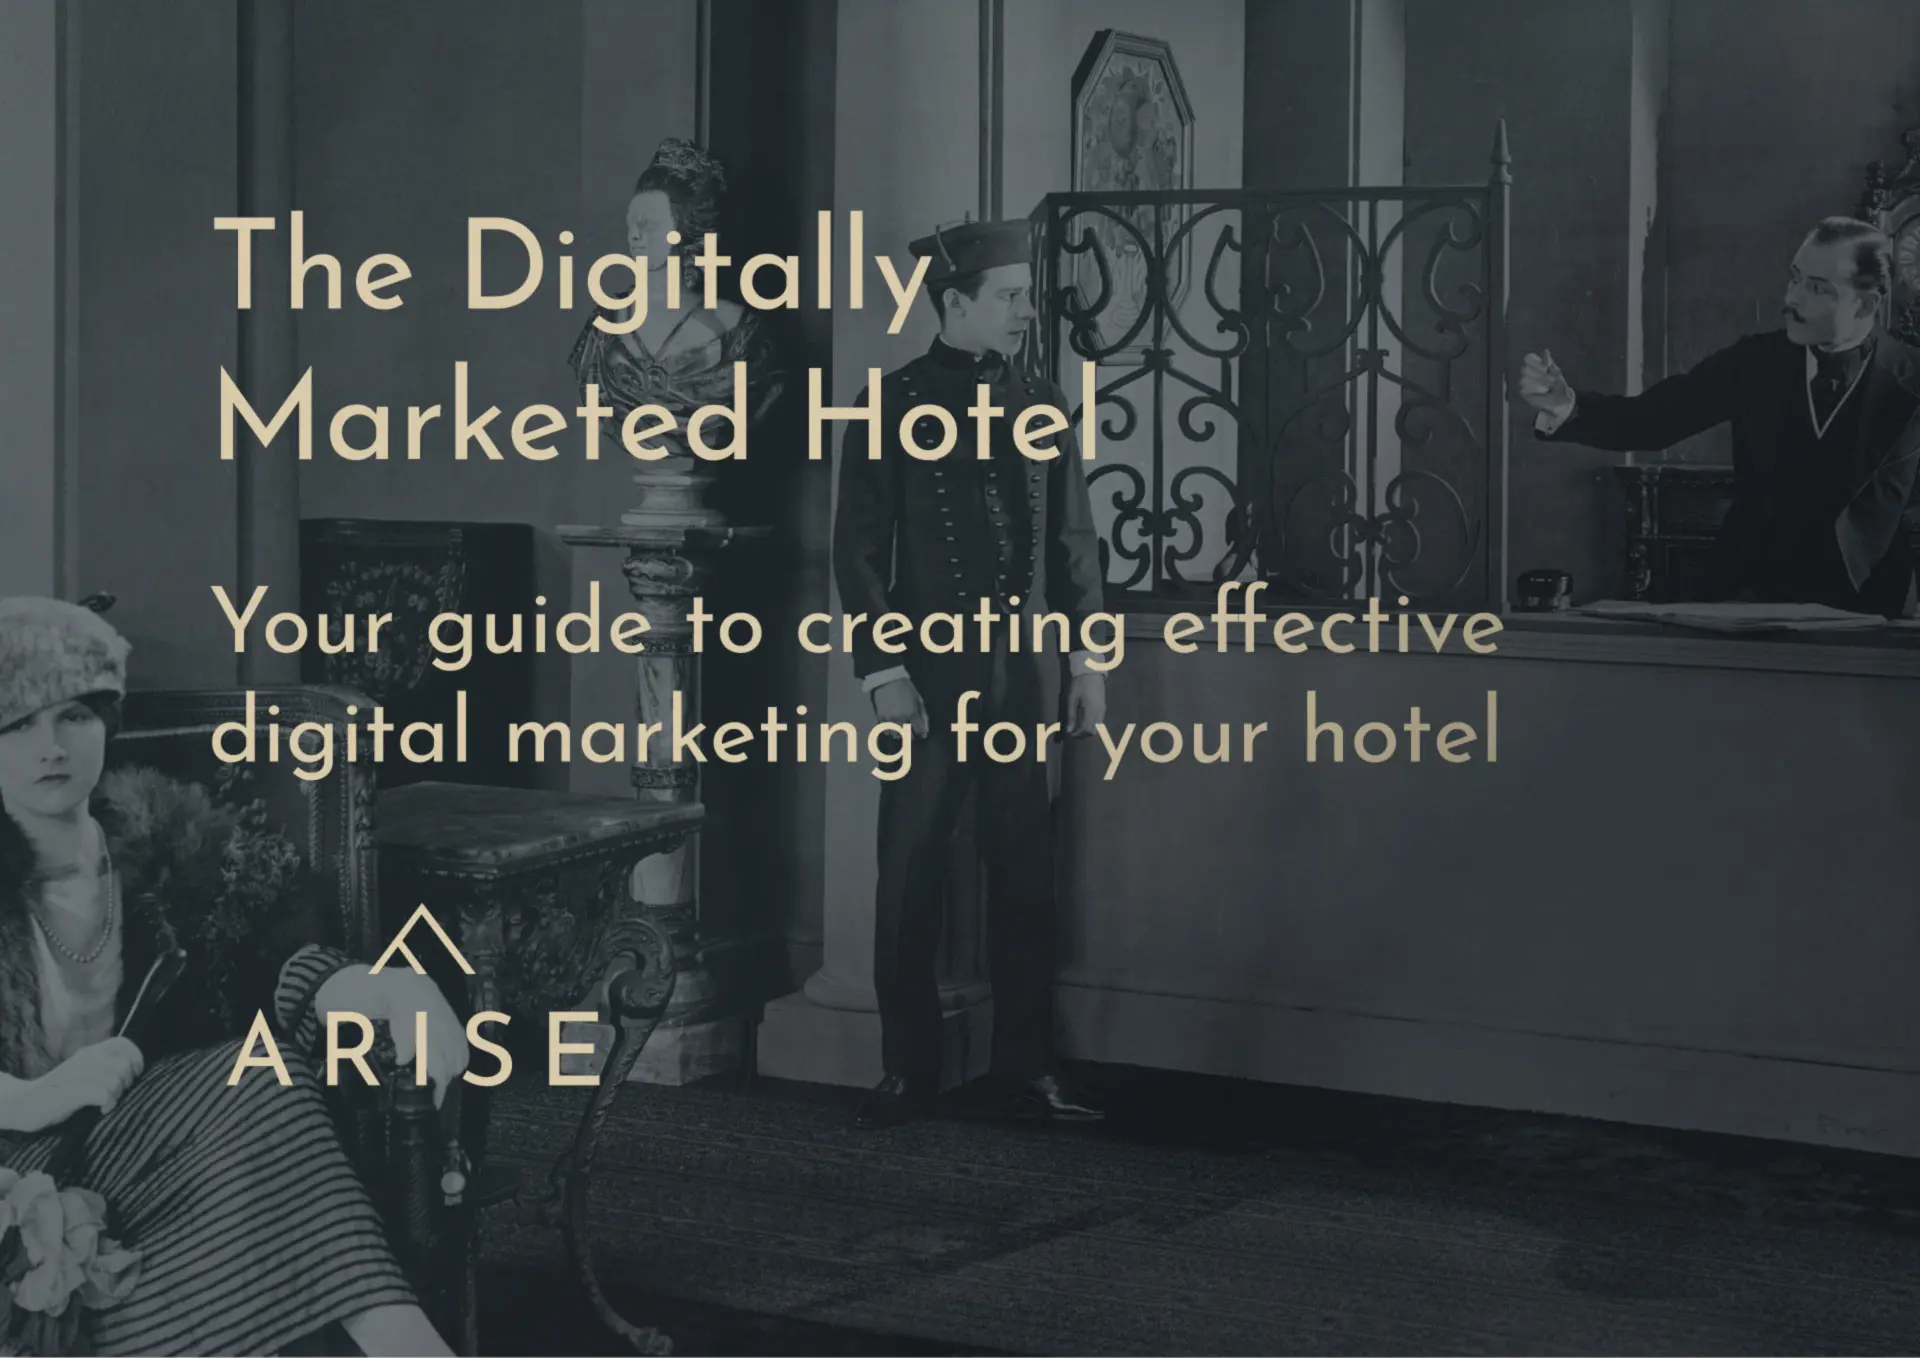 The Digitally Marketed Hotel - Your guide to creating effective digital marketing for your hotel. Request your FREE copy.